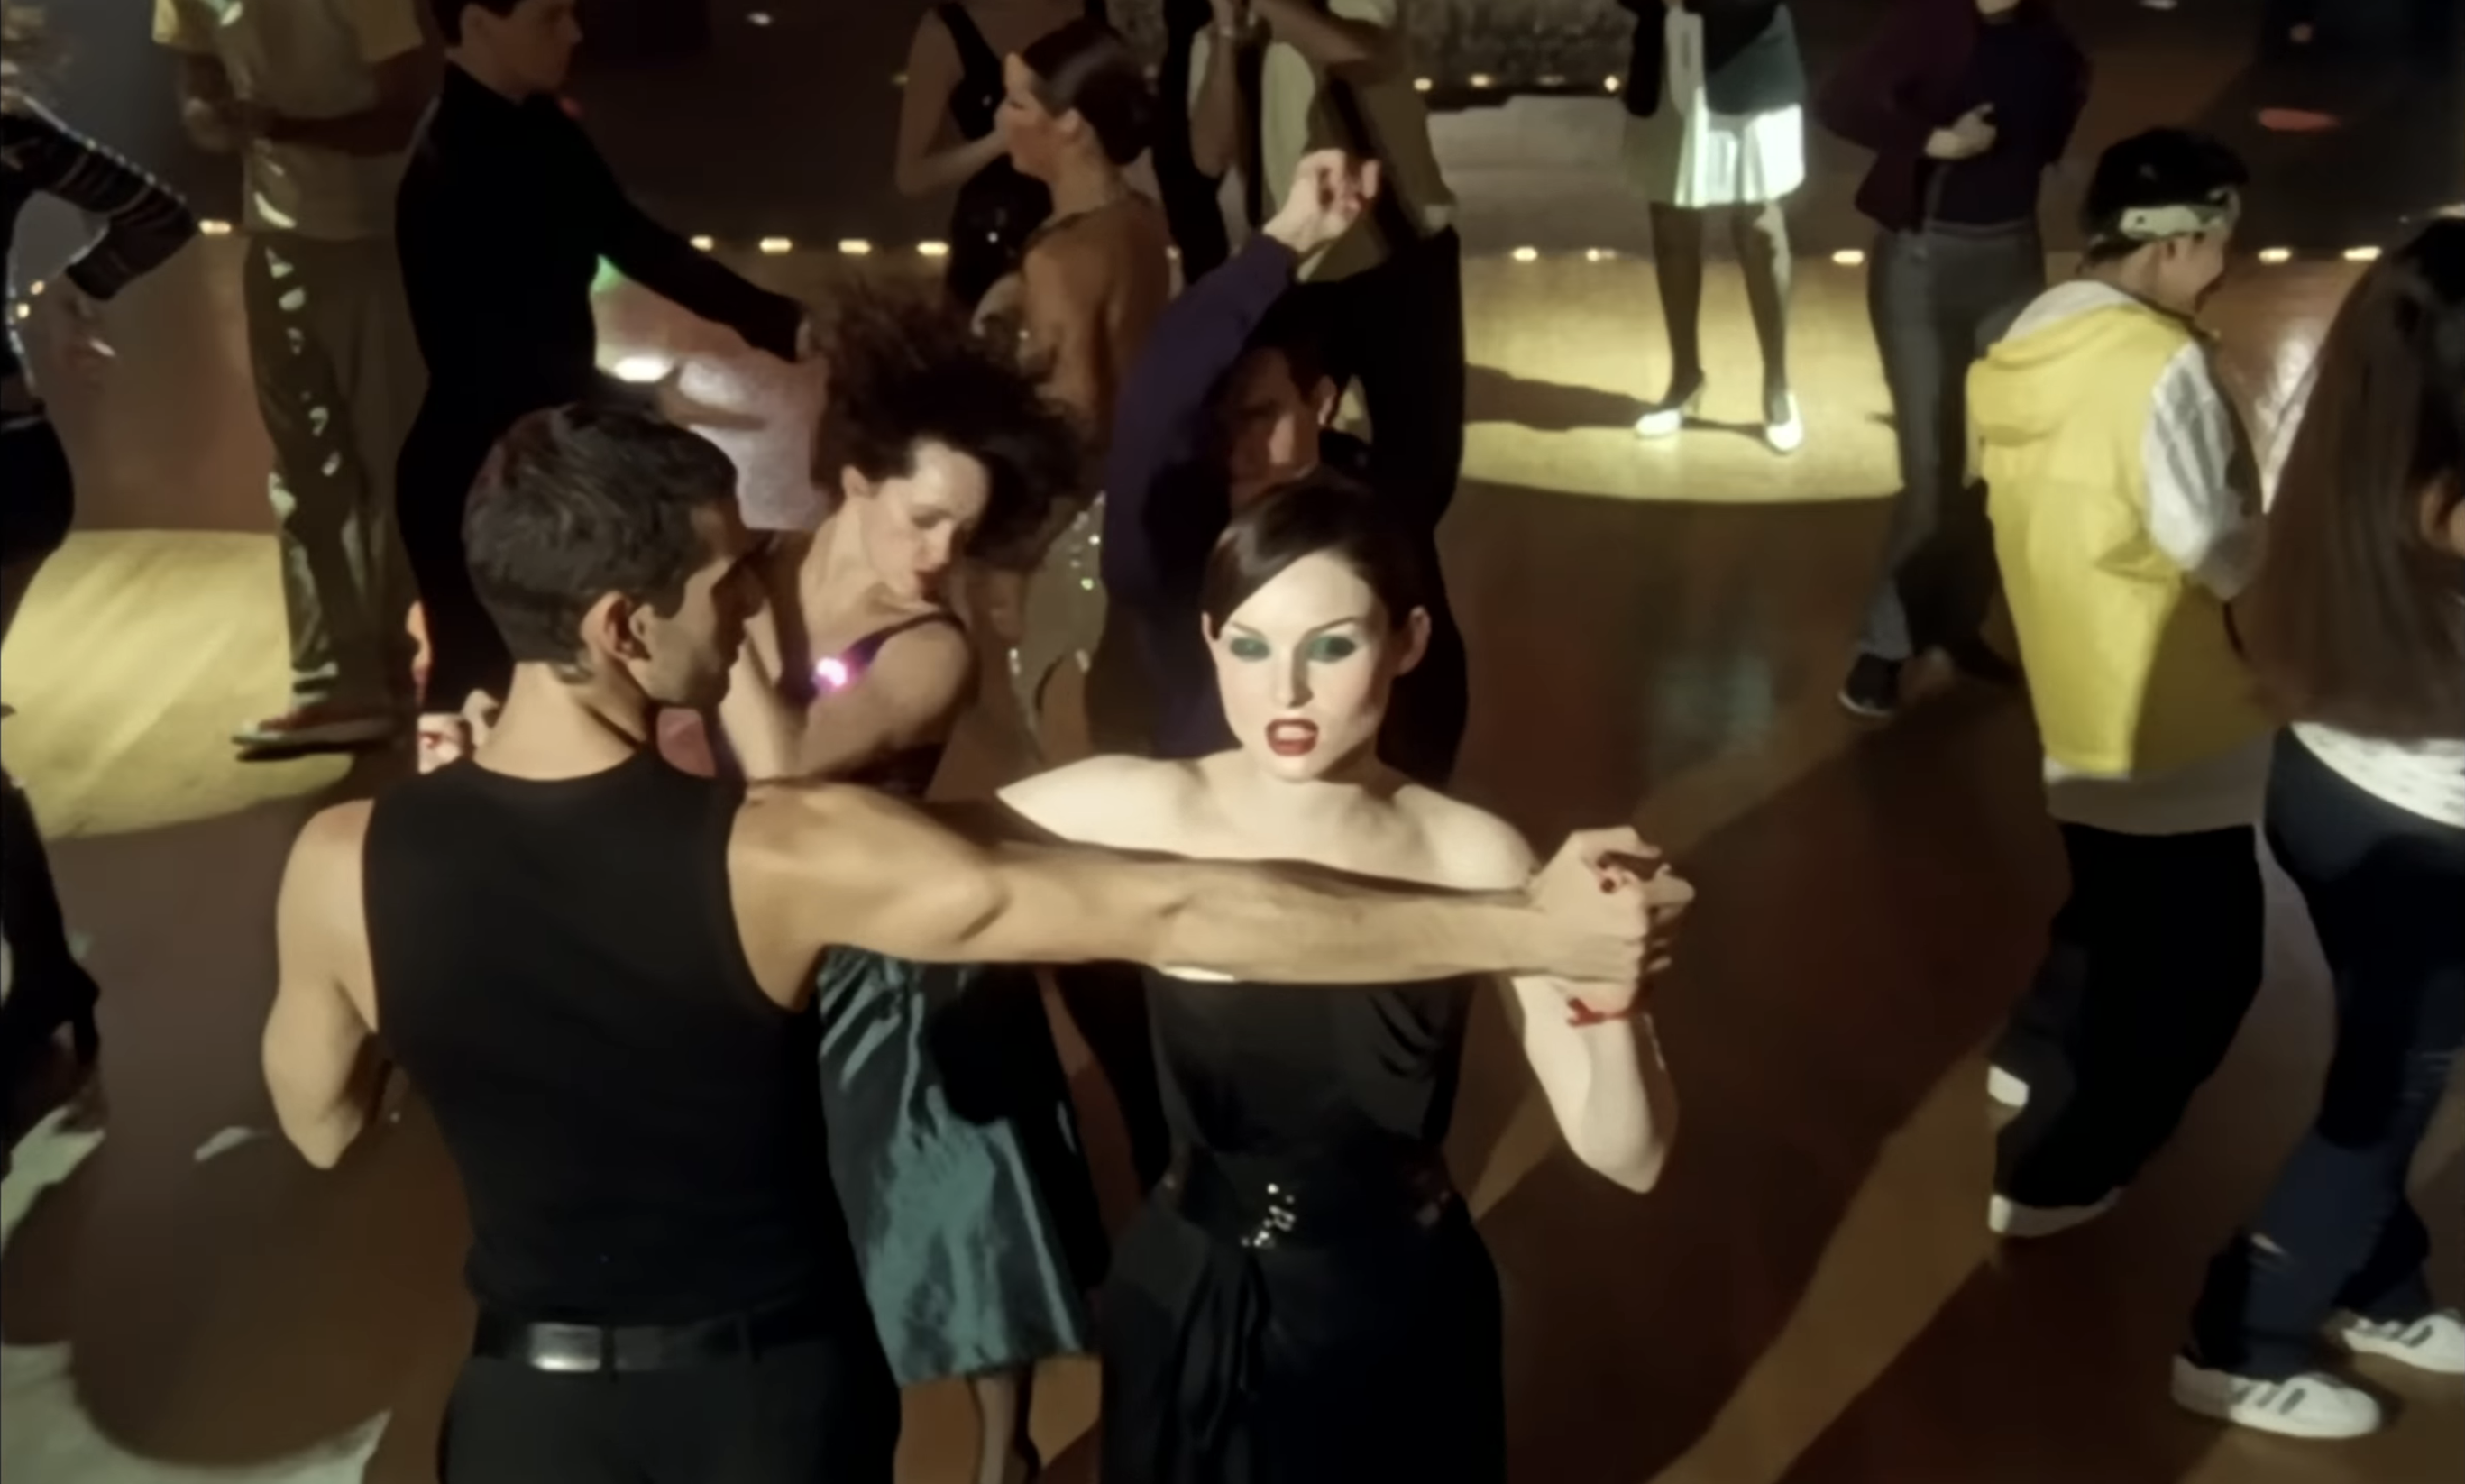 A screenshot from the &quot;Murder on the Dancefloor&quot; video